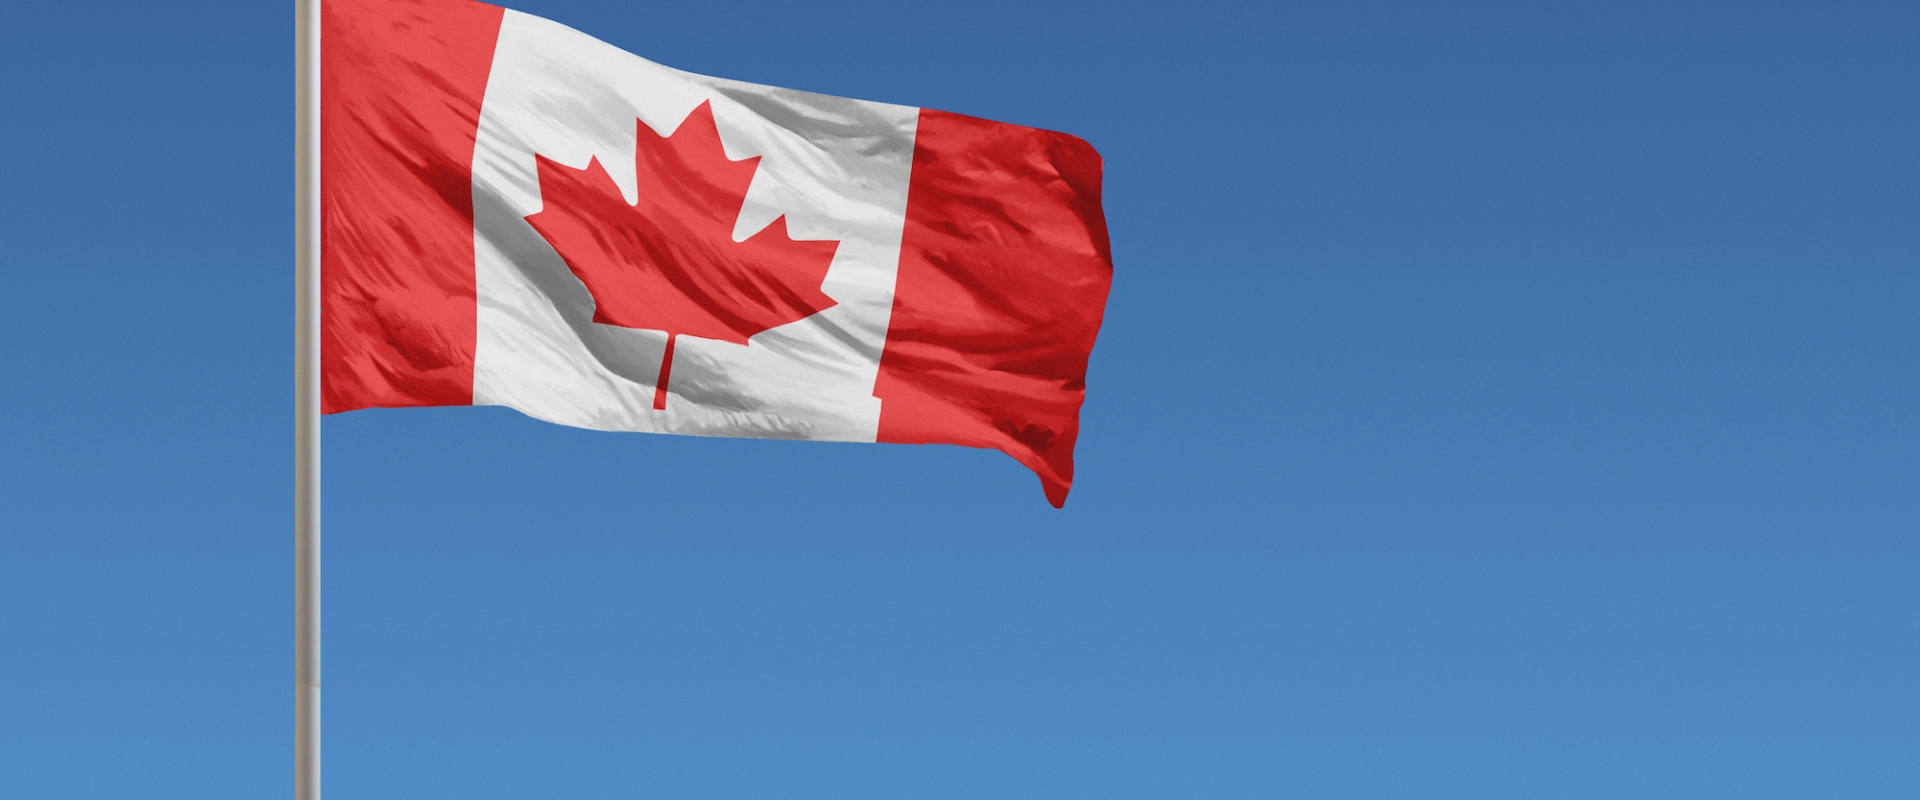 A Canadian flag blowing in the wind